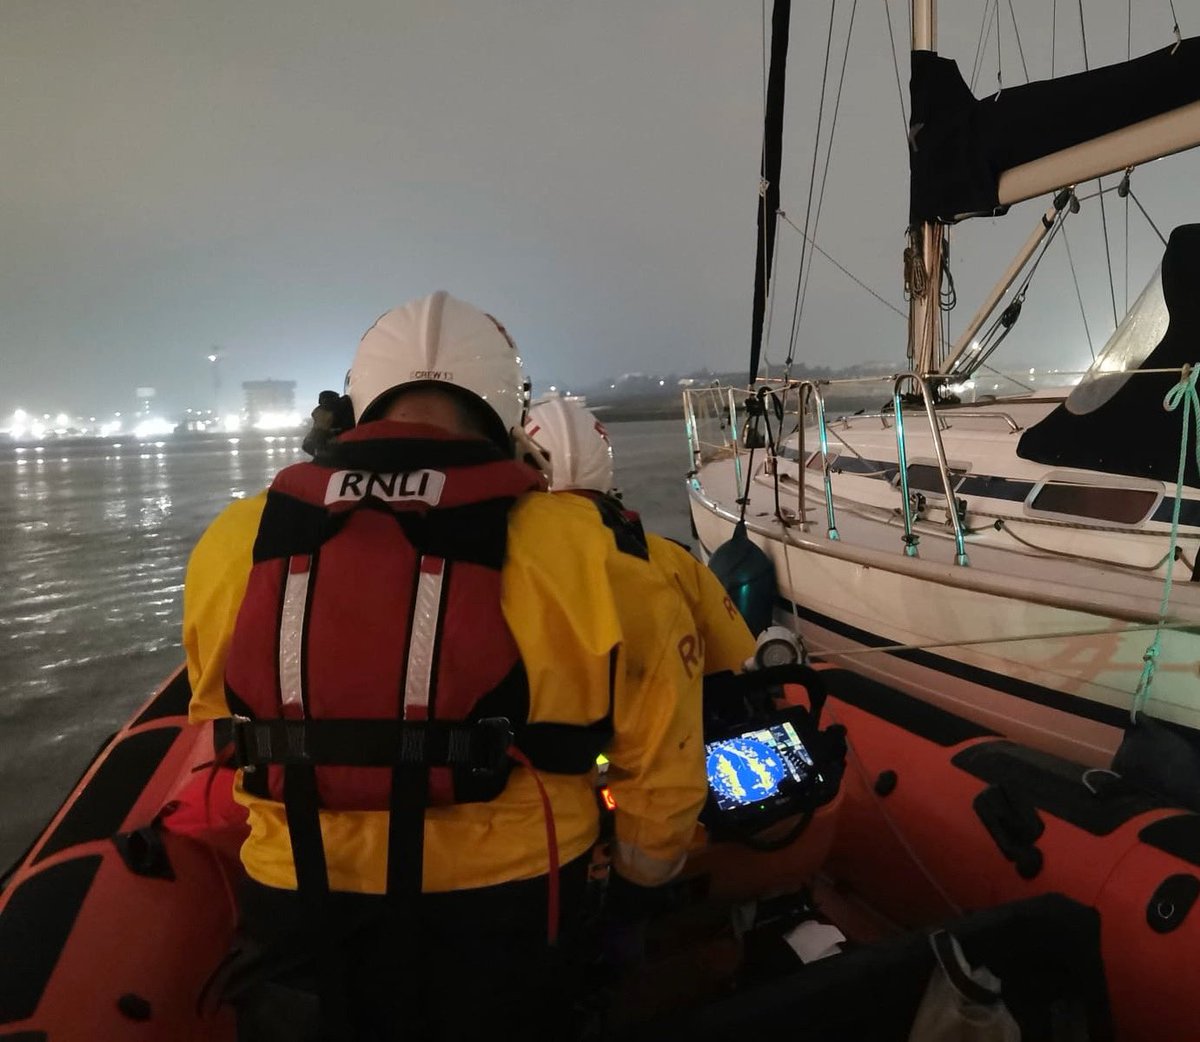 🪫💨🌩️
On Thursday 2 May at 03:47am, the volunteer crew were tasked by HM Coastguard to a 12m sailing yacht that was reported to be drifting near Broadness on the River Thames.

This tasking involved engine loss, lack of wind and lightning strikes.

rnli.org/news-and-media…